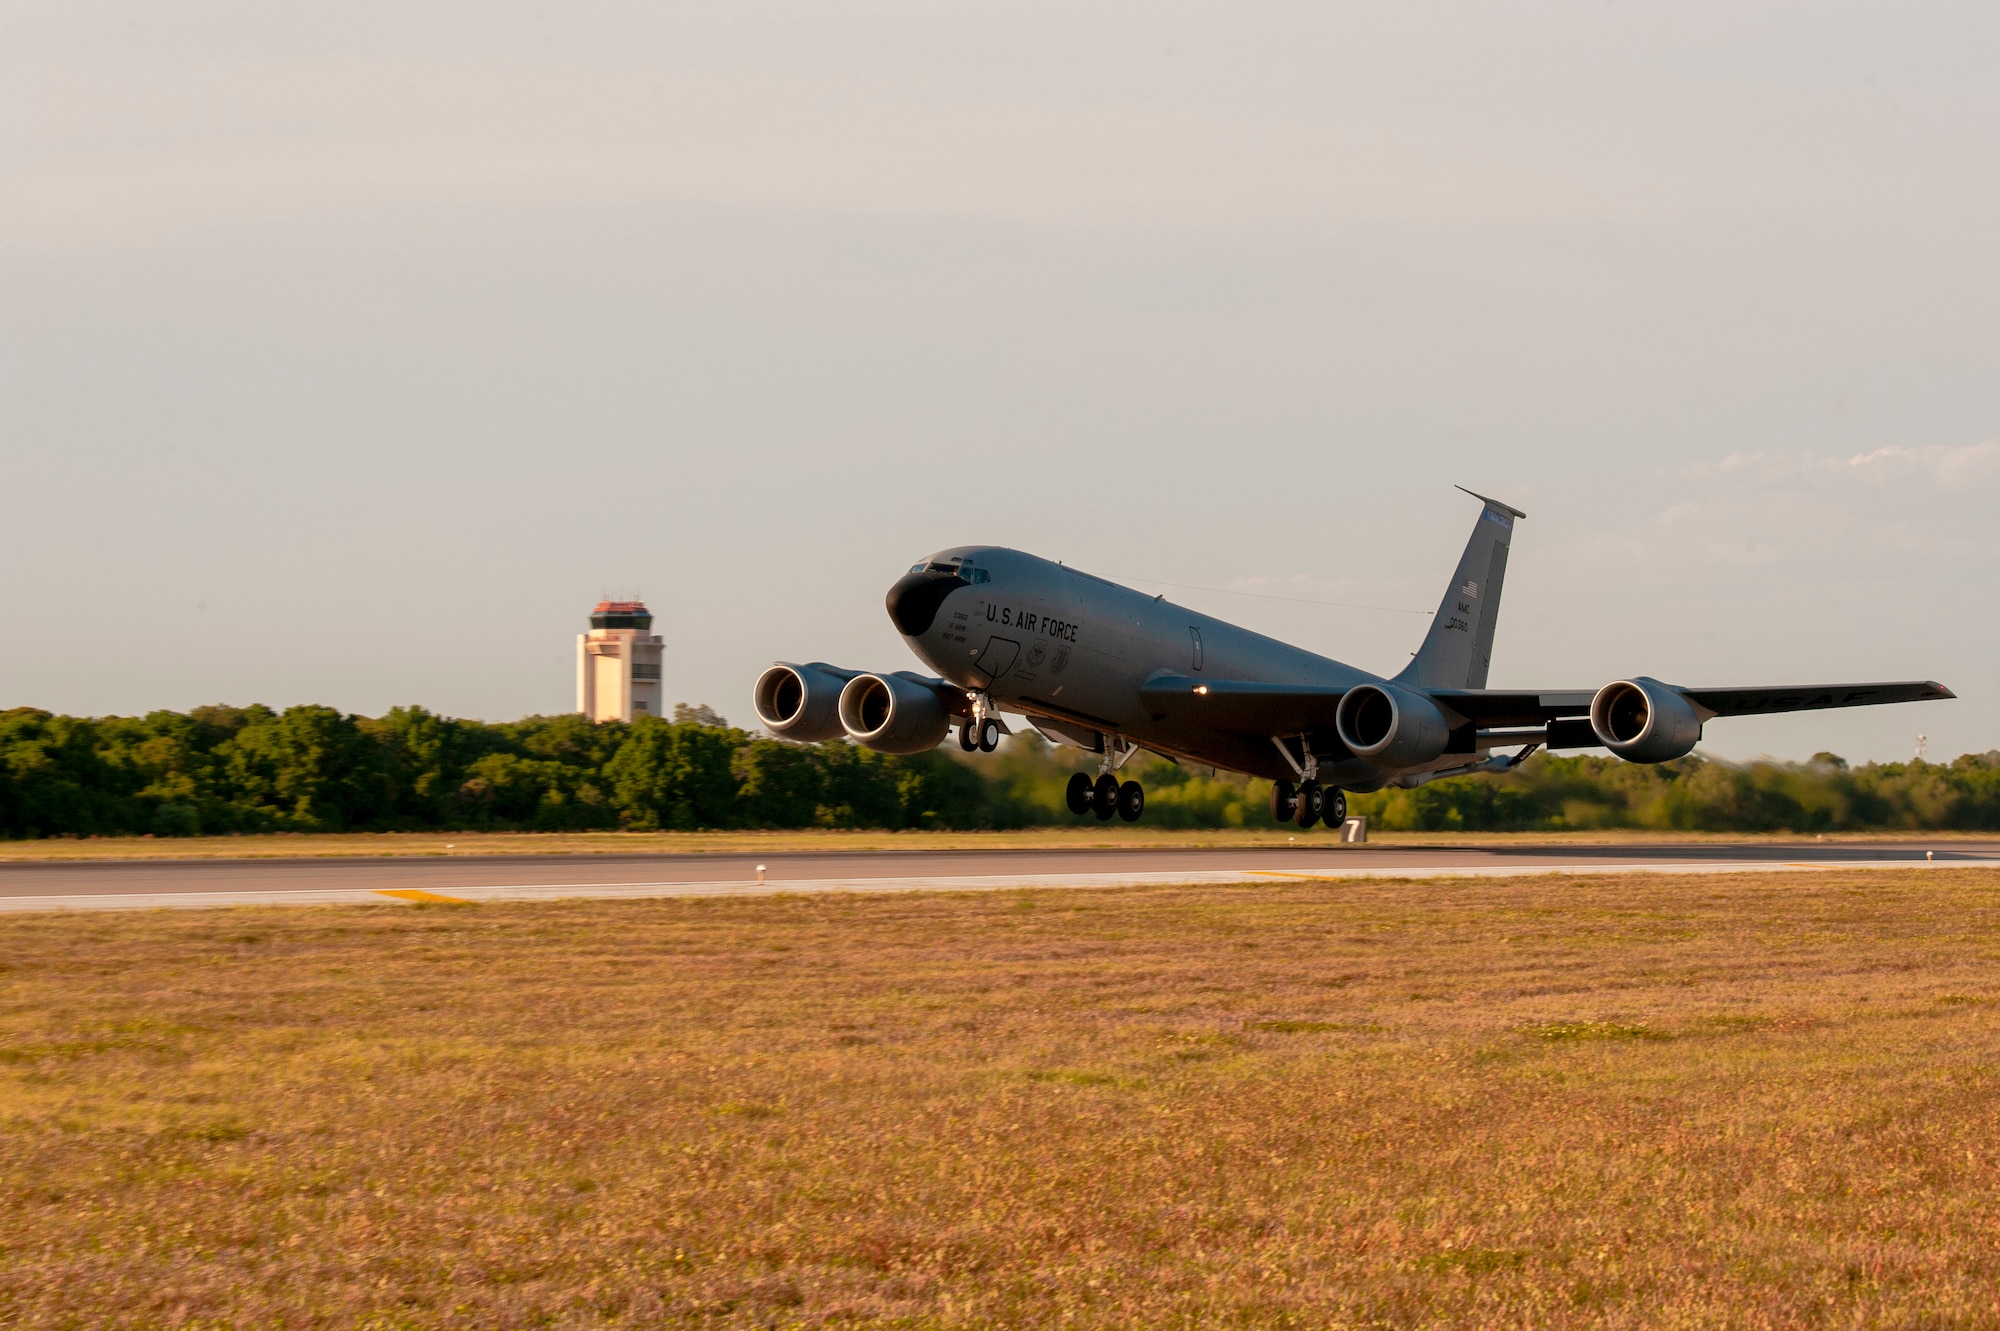 A KC-135 Stratotanker aircraft takes off from MacDill Air Force Base, Fla., April 9, 2021. The aircraft was carrying cargo and Airmen from MacDill AFB to their deployed location at Al Udeid Air Base, Qatar. (U.S. Air Force photo by Airman 1st Class David D. McLoney)